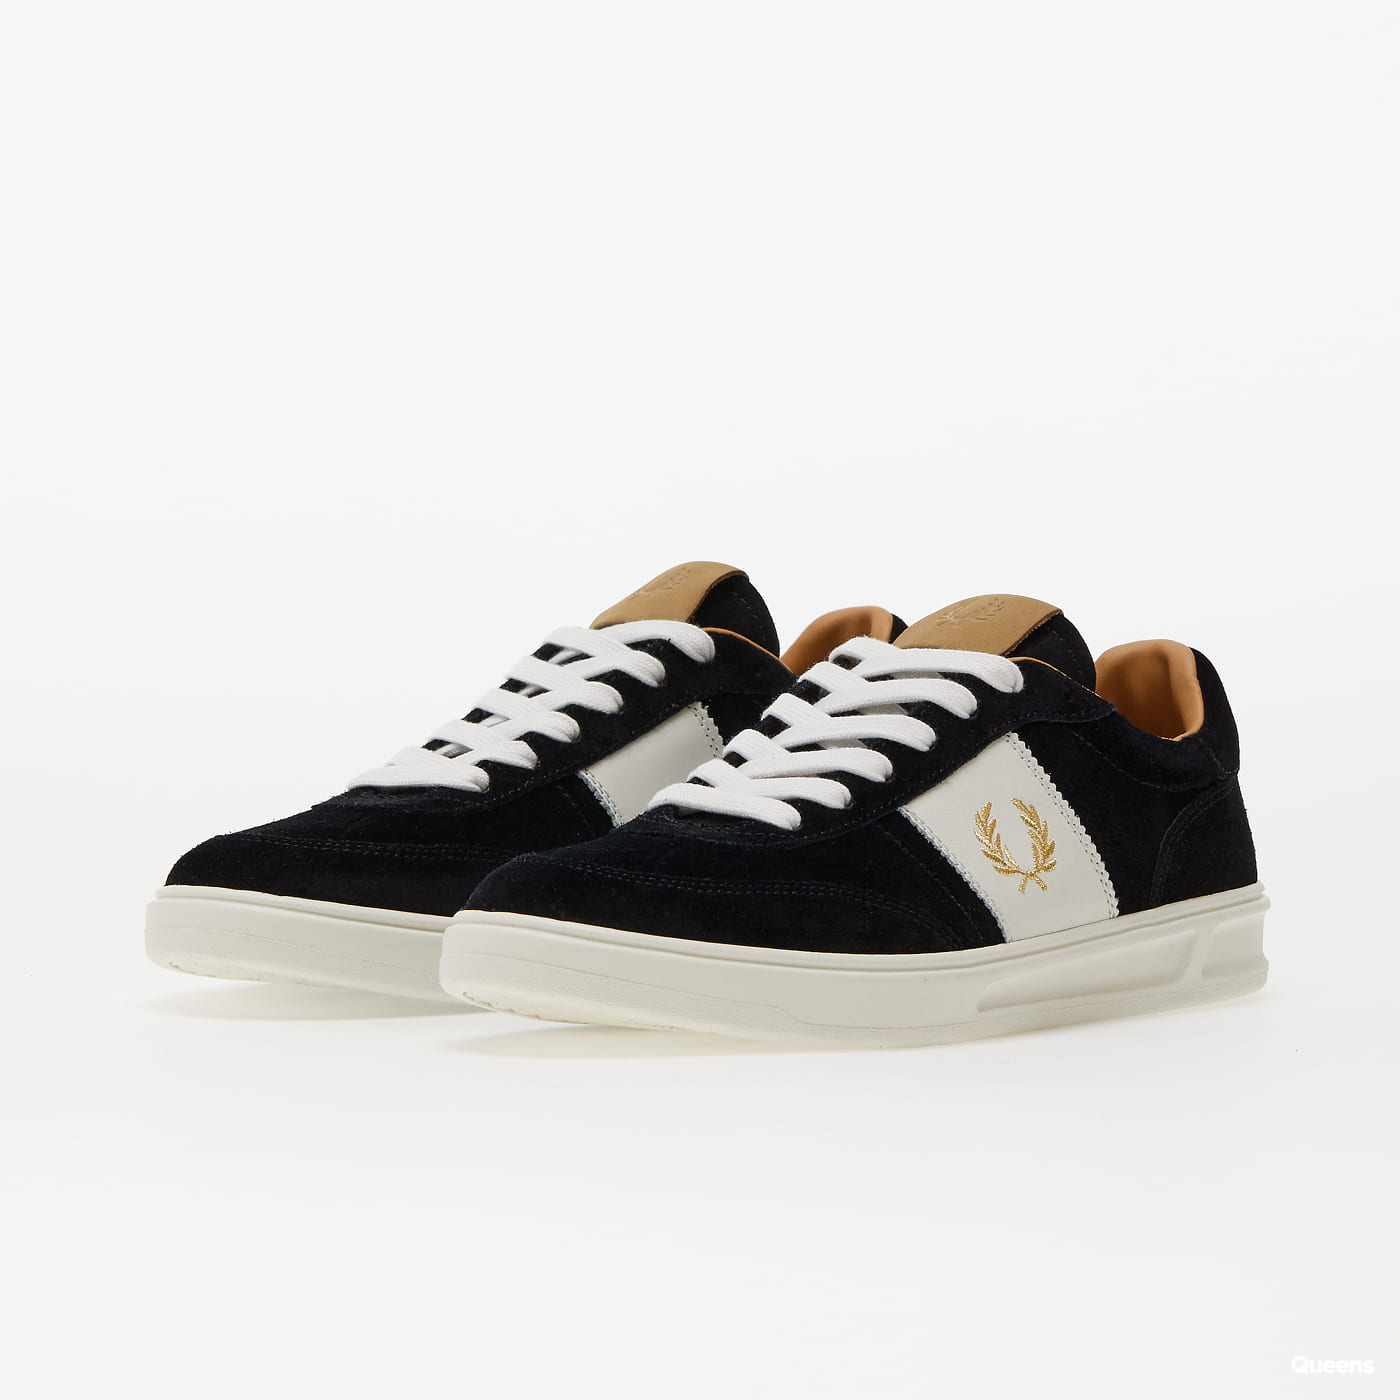 FRED PERRY B400 Suede black Fred Perry